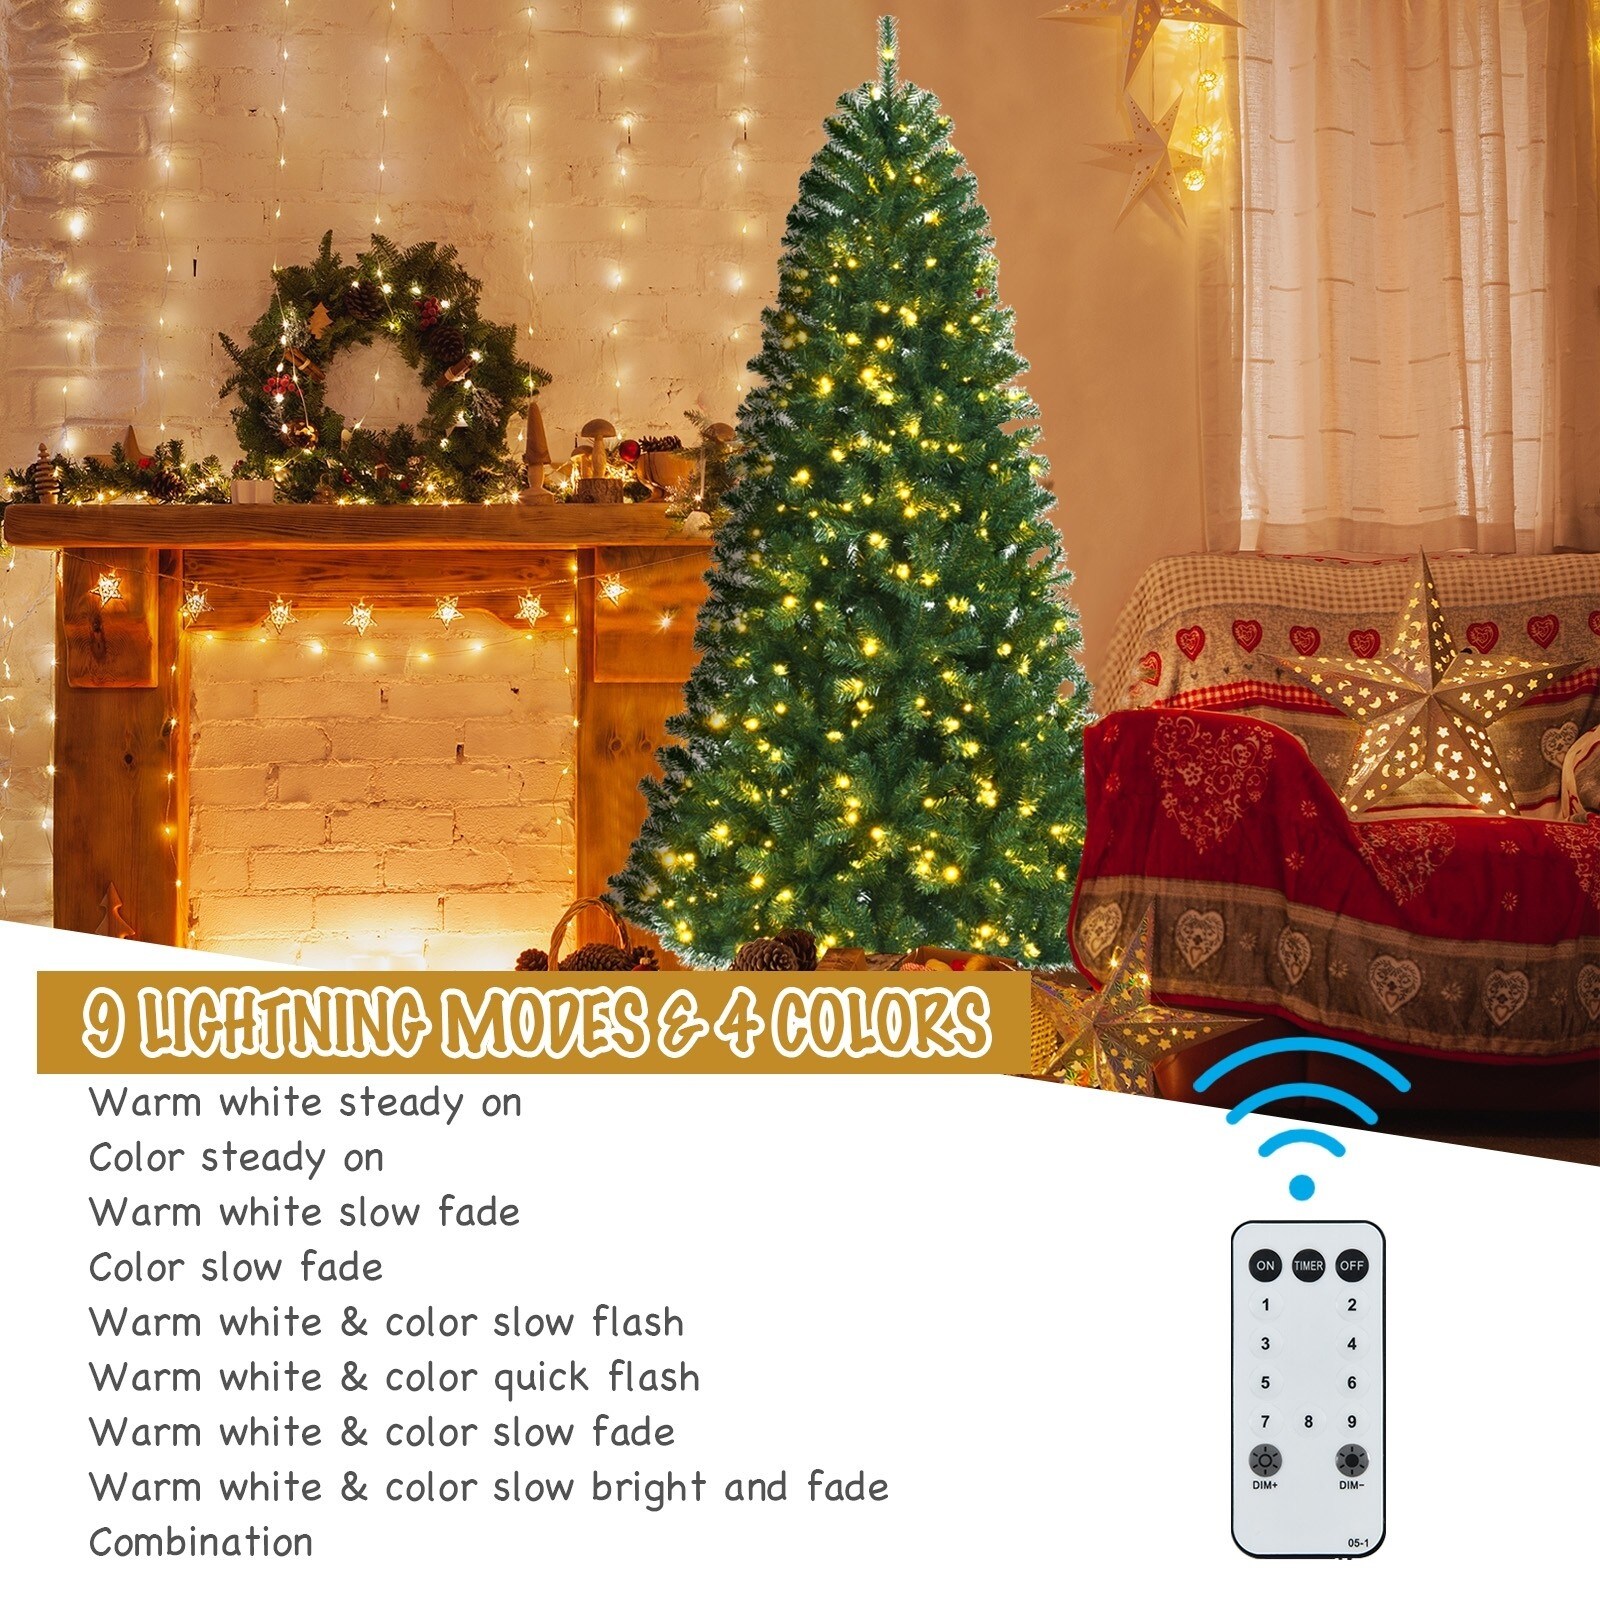 https://ak1.ostkcdn.com/images/products/is/images/direct/f1bc183c10e2a60c08a7aeed960a016cbe346657/Artificial-Hinged-Christmas-Tree-with-Remote-controlled-Color-changing-LED-Lights.jpg